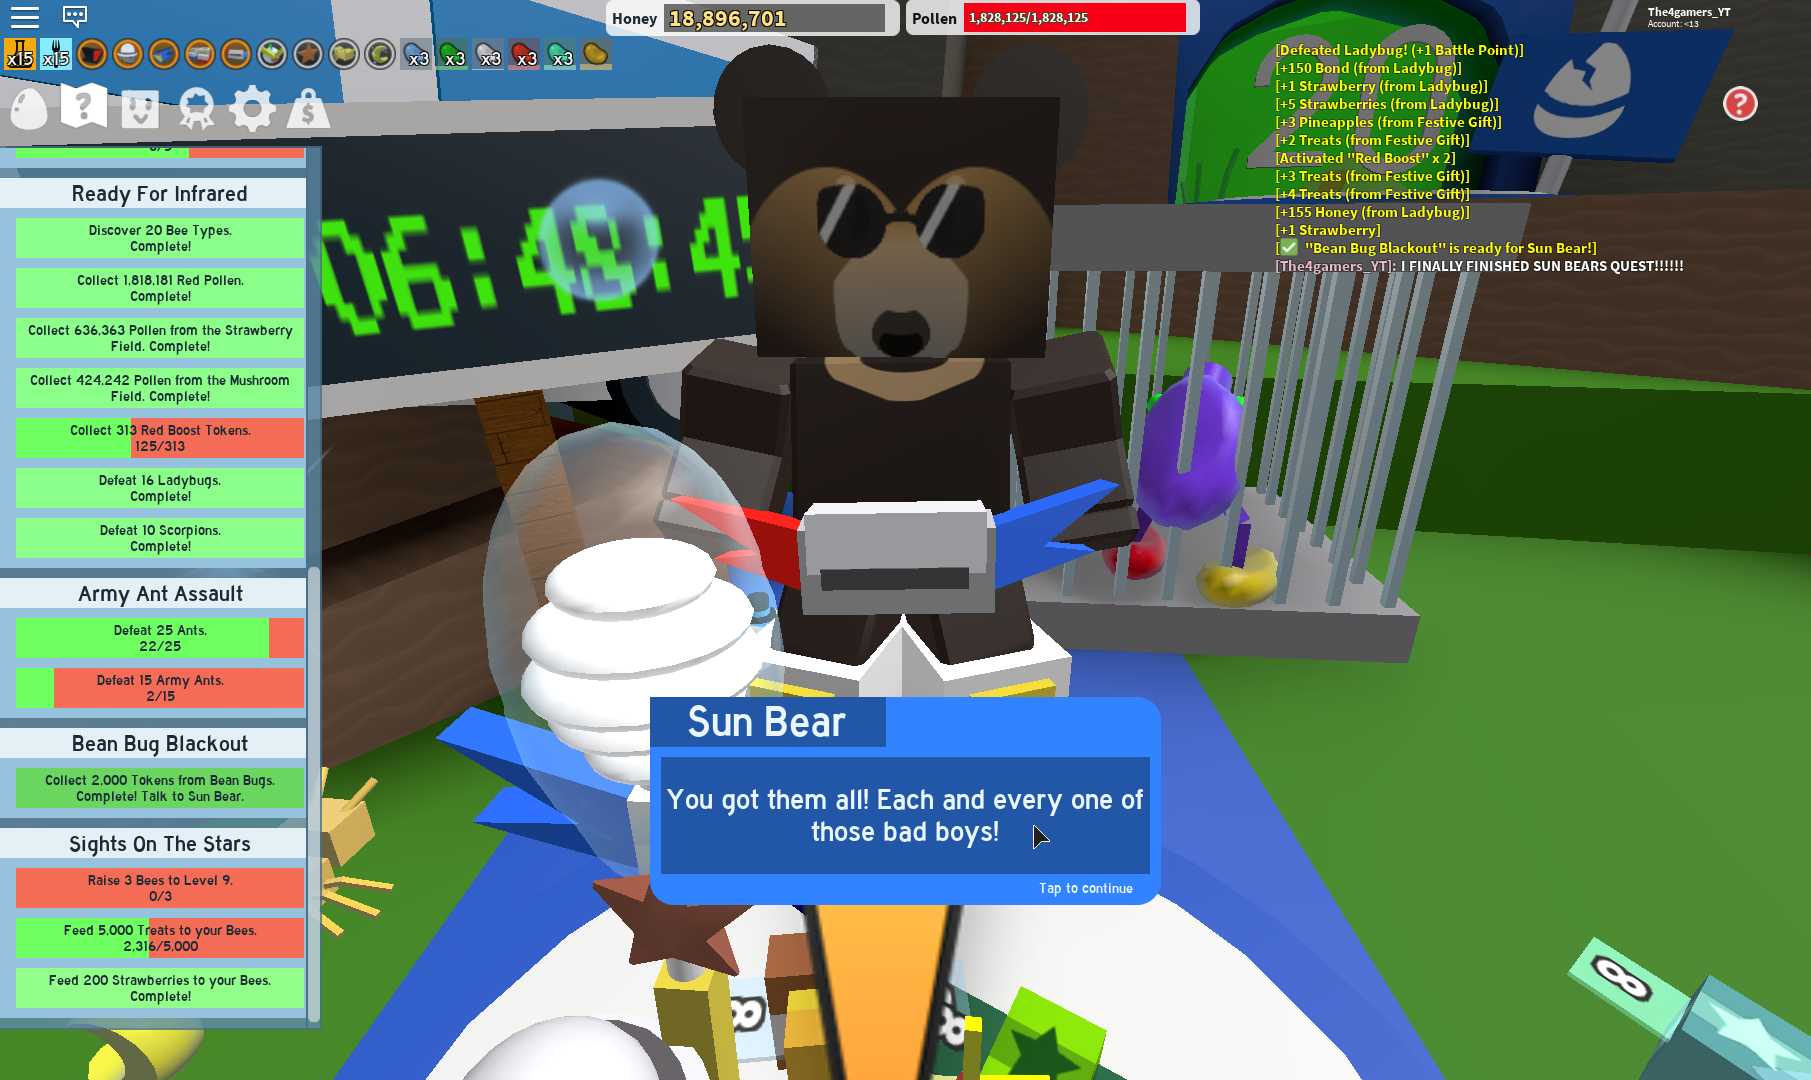 Discuss Everything About Bee Swarm Simulator Wiki Fandom - roblox bee swarm simulator all sun bear quests